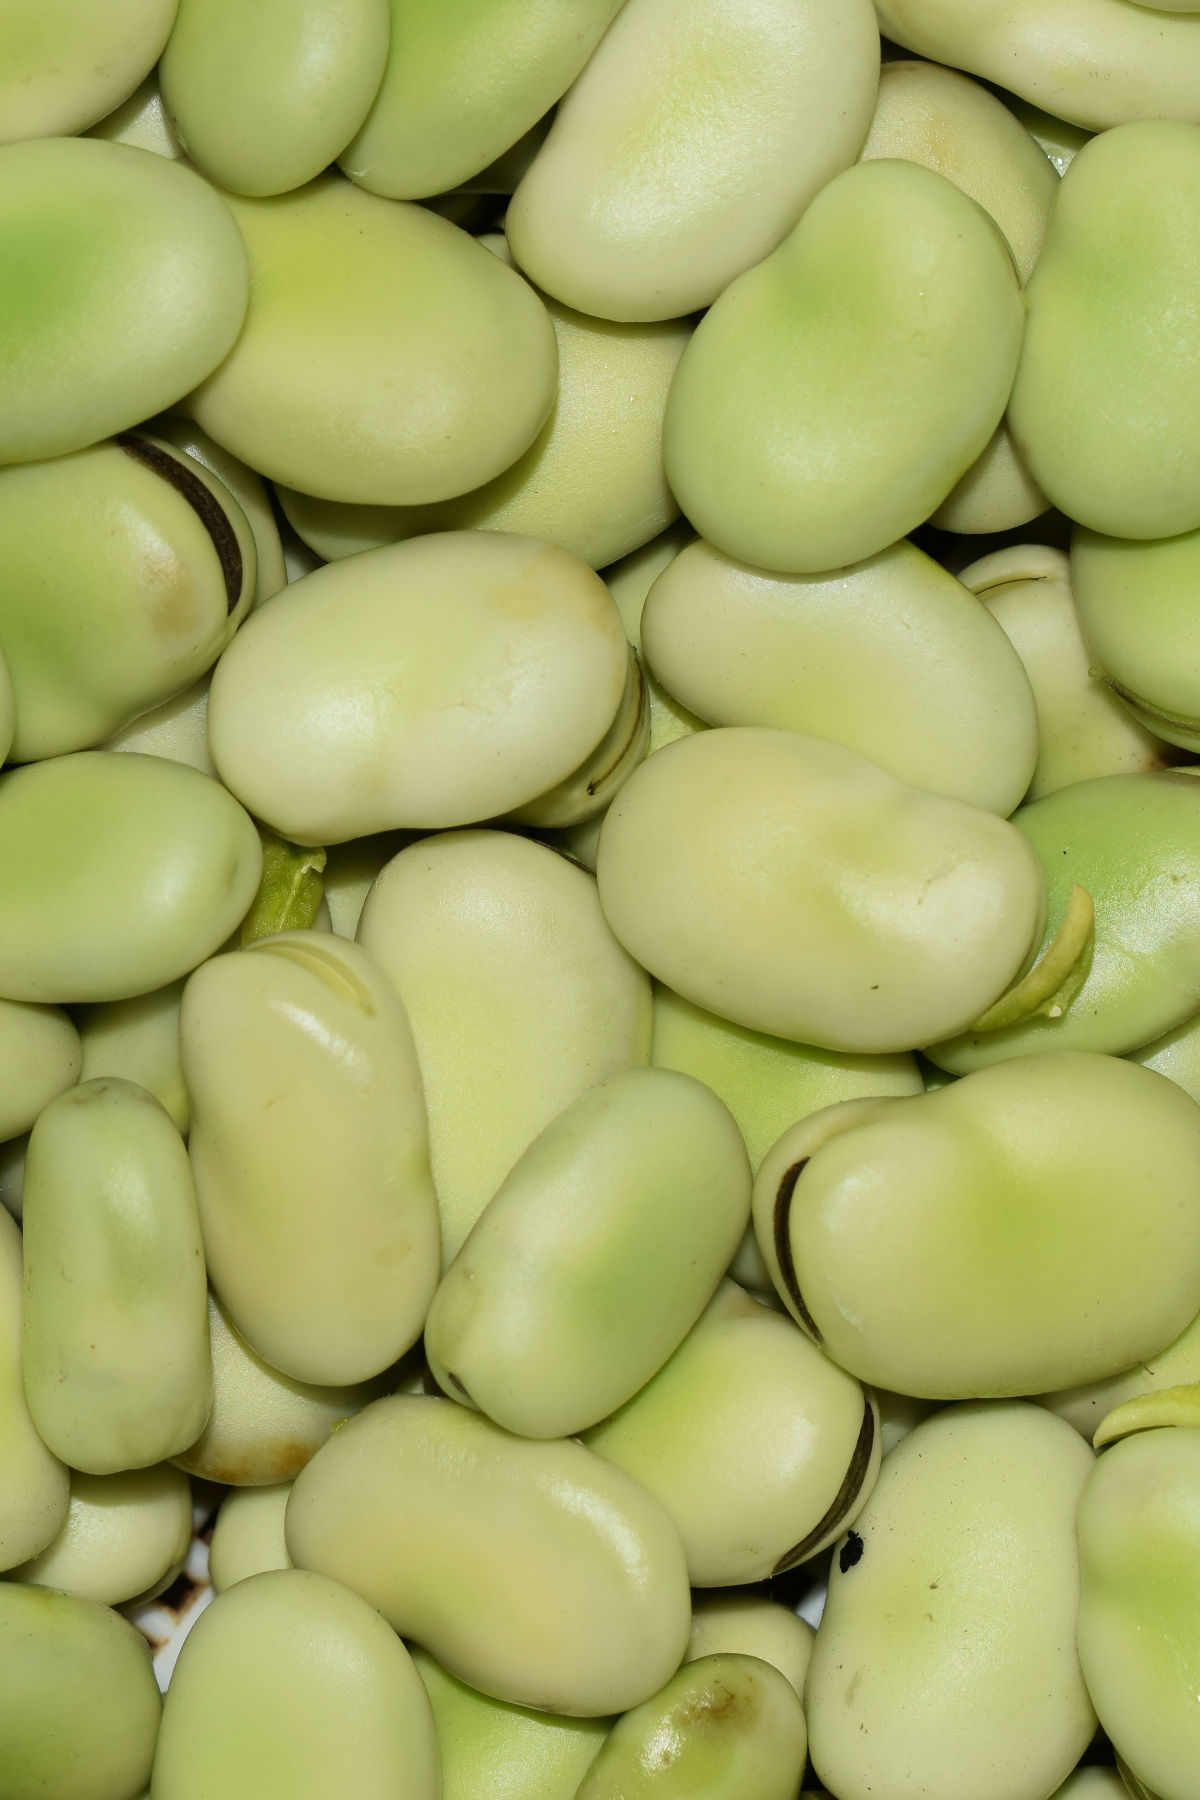 Fava or broad beans close up image.